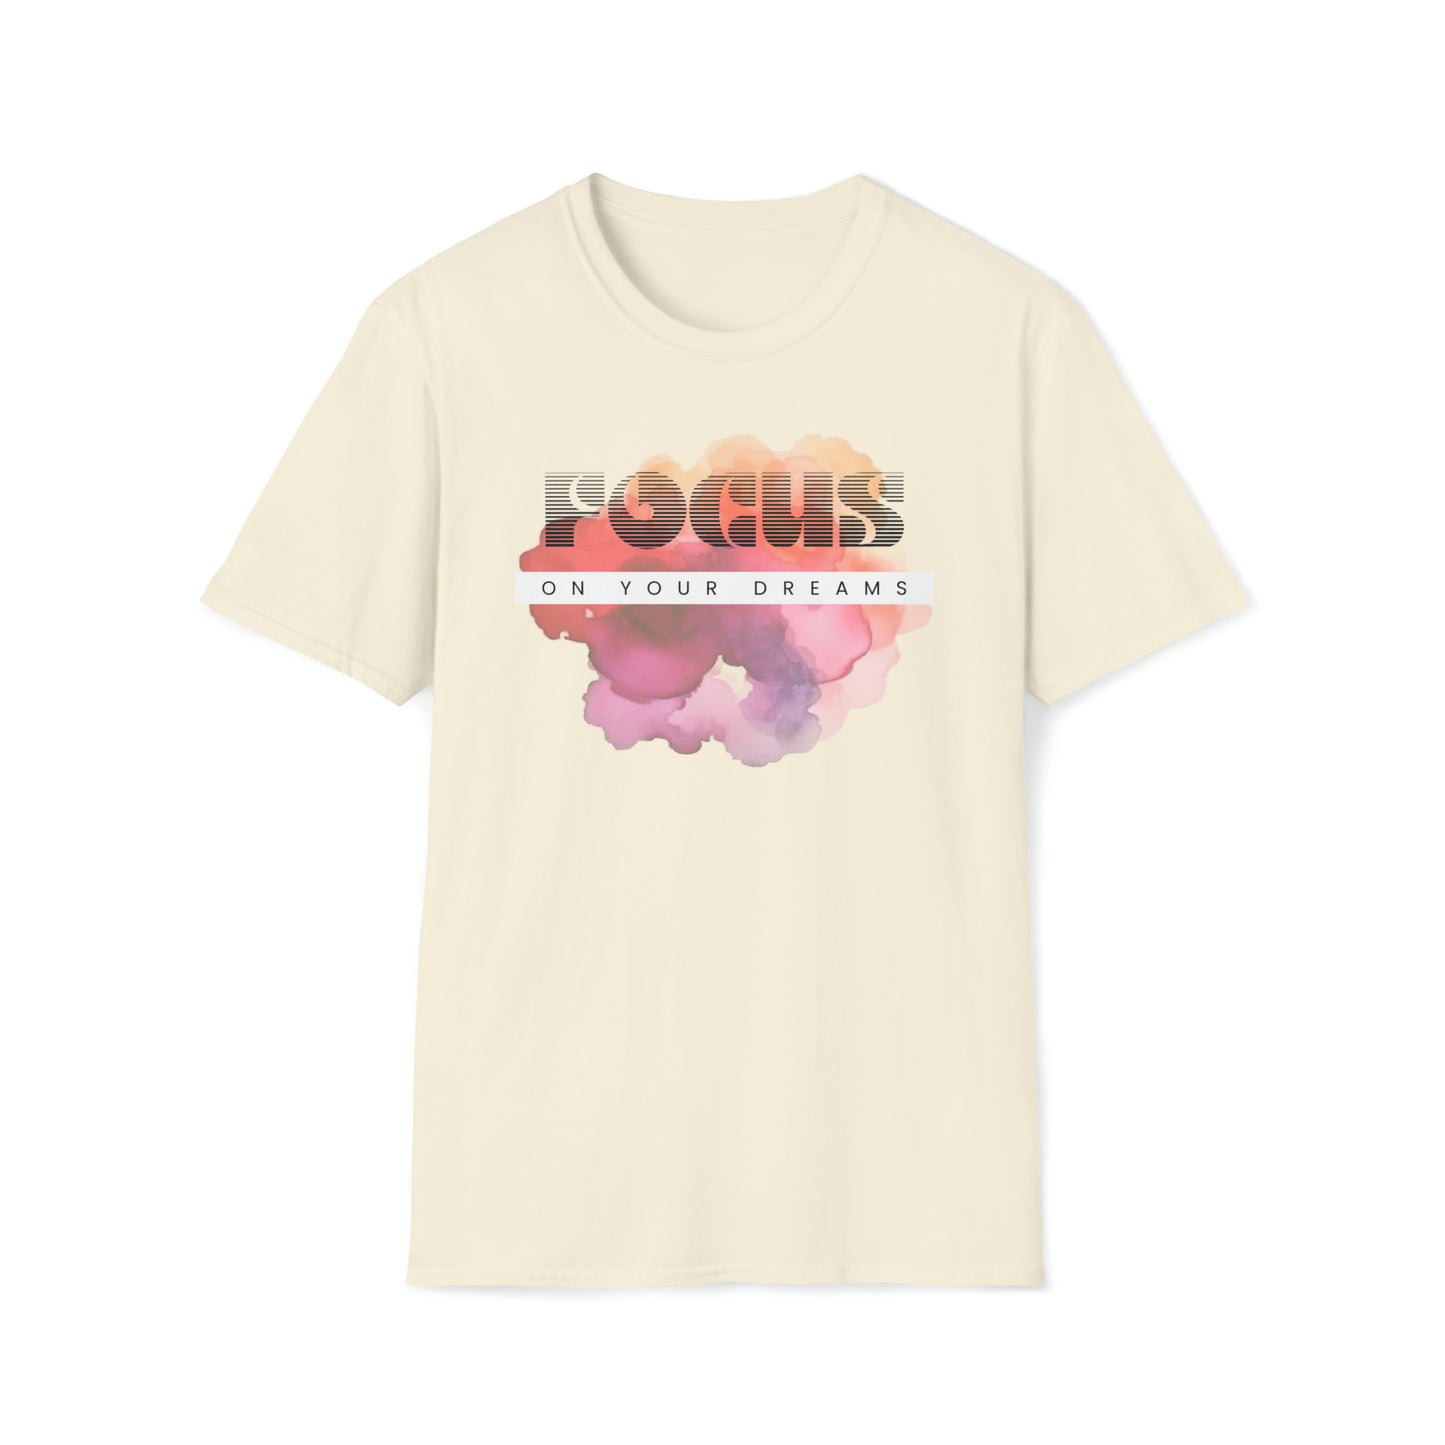 Focus on your dreams! Unisex Softstyle T-Shirt